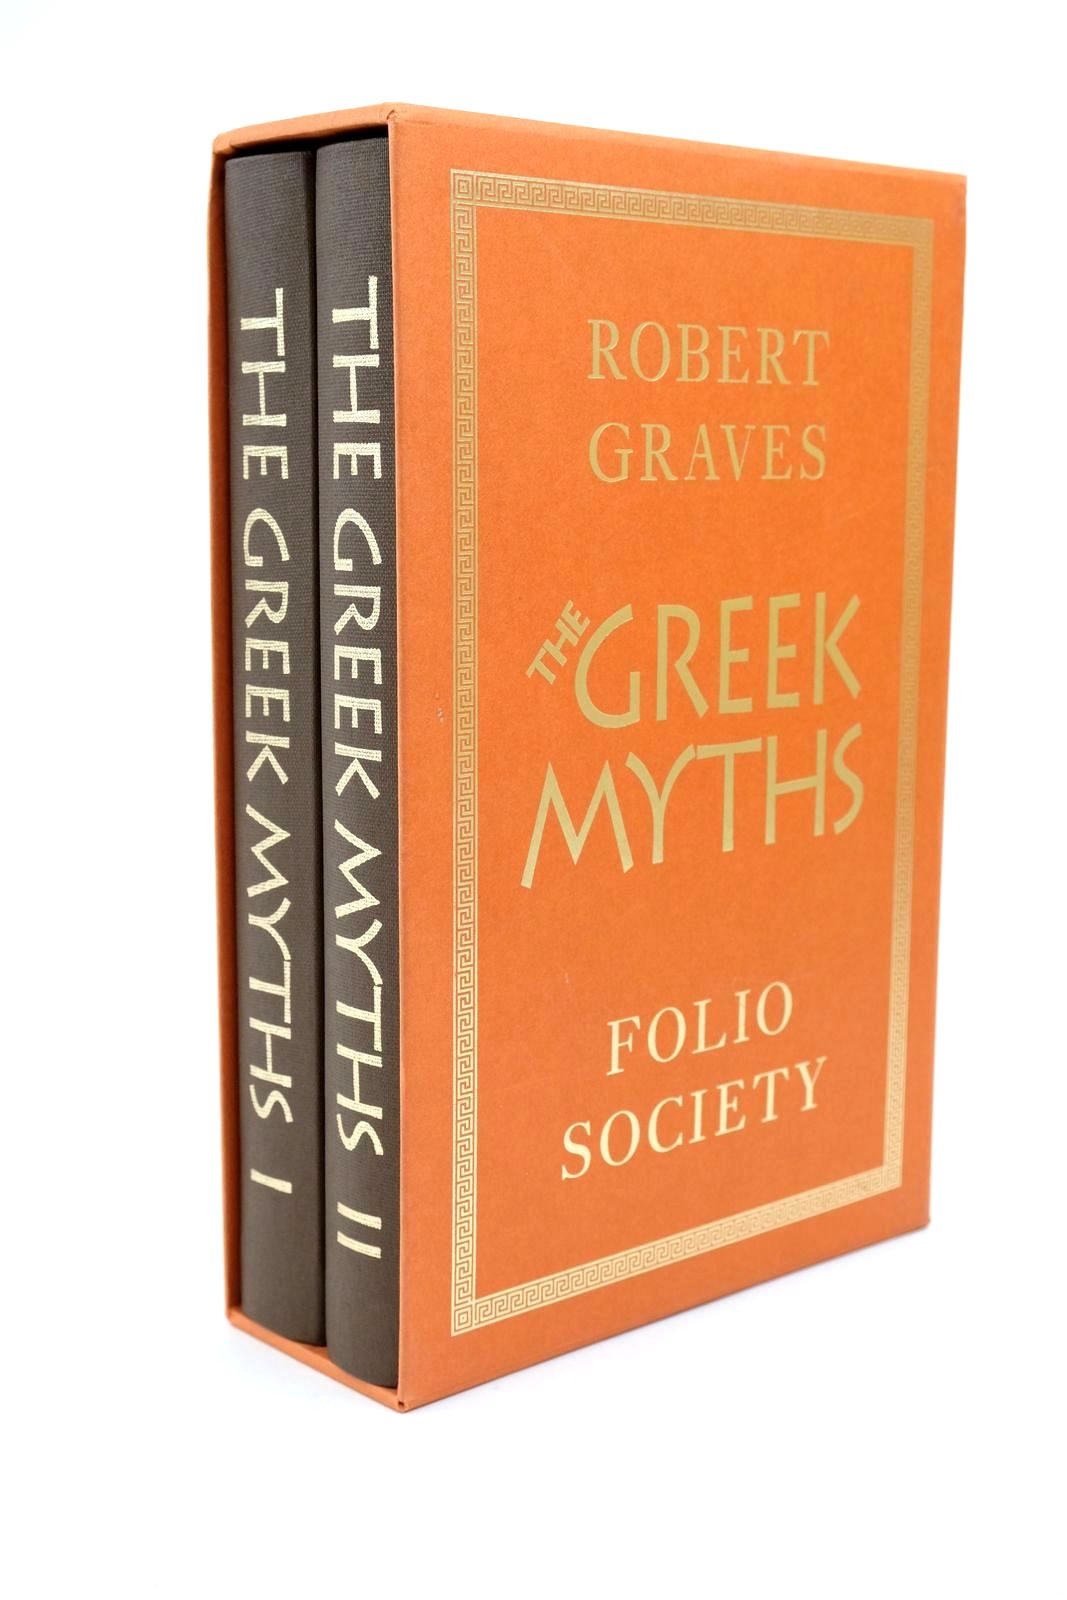 Photo of THE GREEK MYTHS (2 VOLUMES) written by Graves, Robert McLeish, Kenneth illustrated by Baker, Grahame published by Folio Society (STOCK CODE: 1323136)  for sale by Stella & Rose's Books